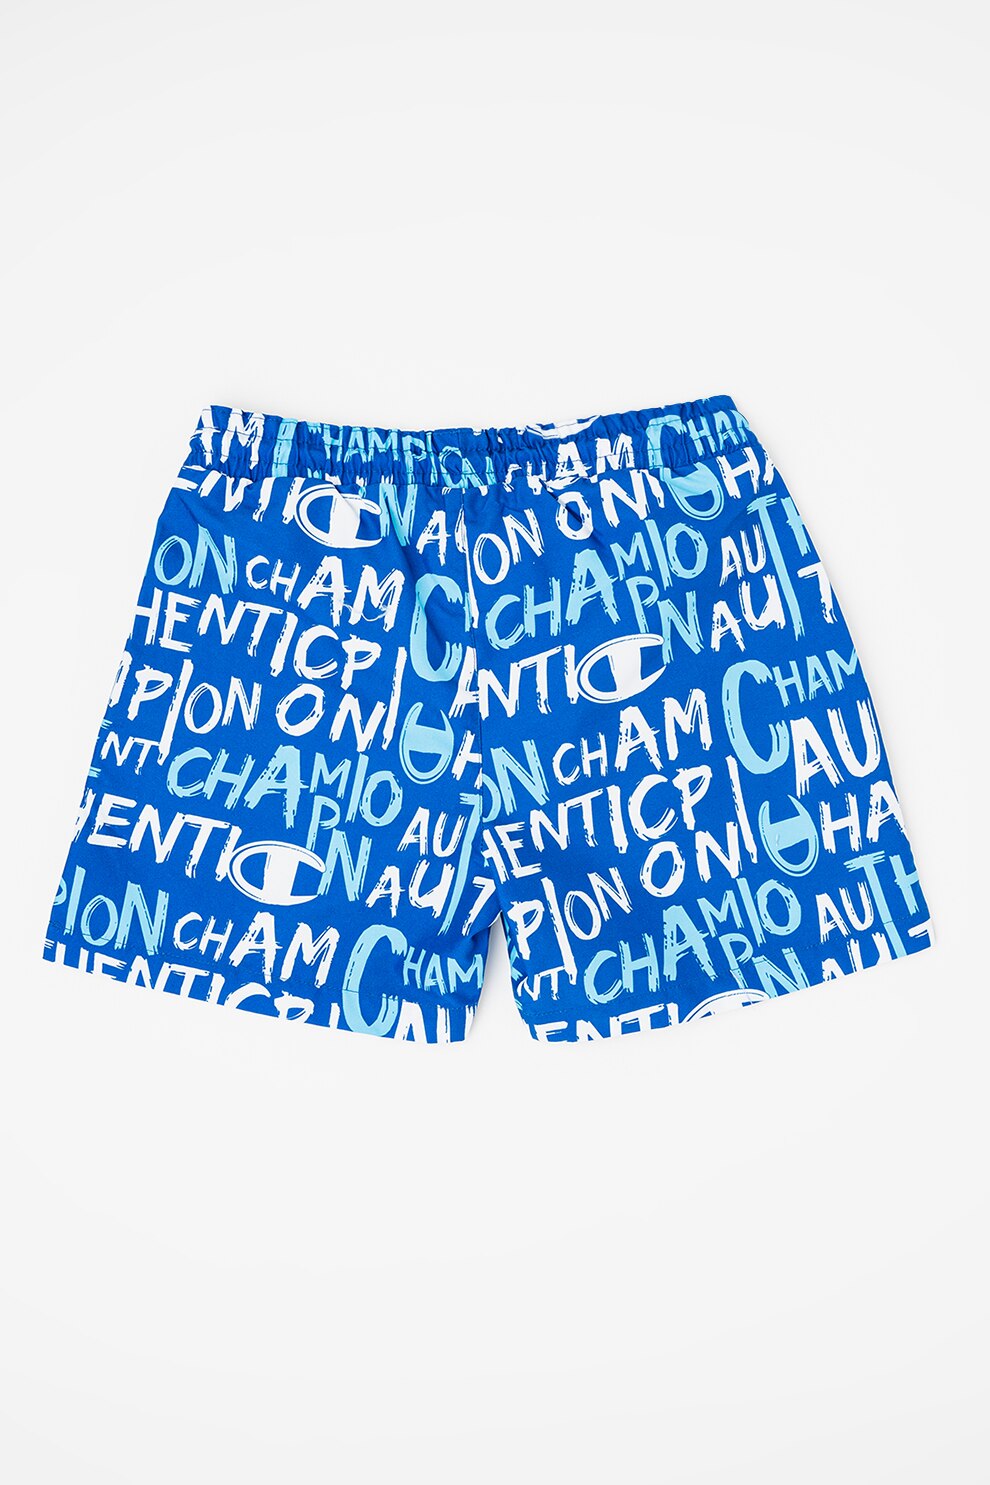 Southern Inlay Criticism Champion, Pantaloni scurti de baie Authentic - eMAG.ro